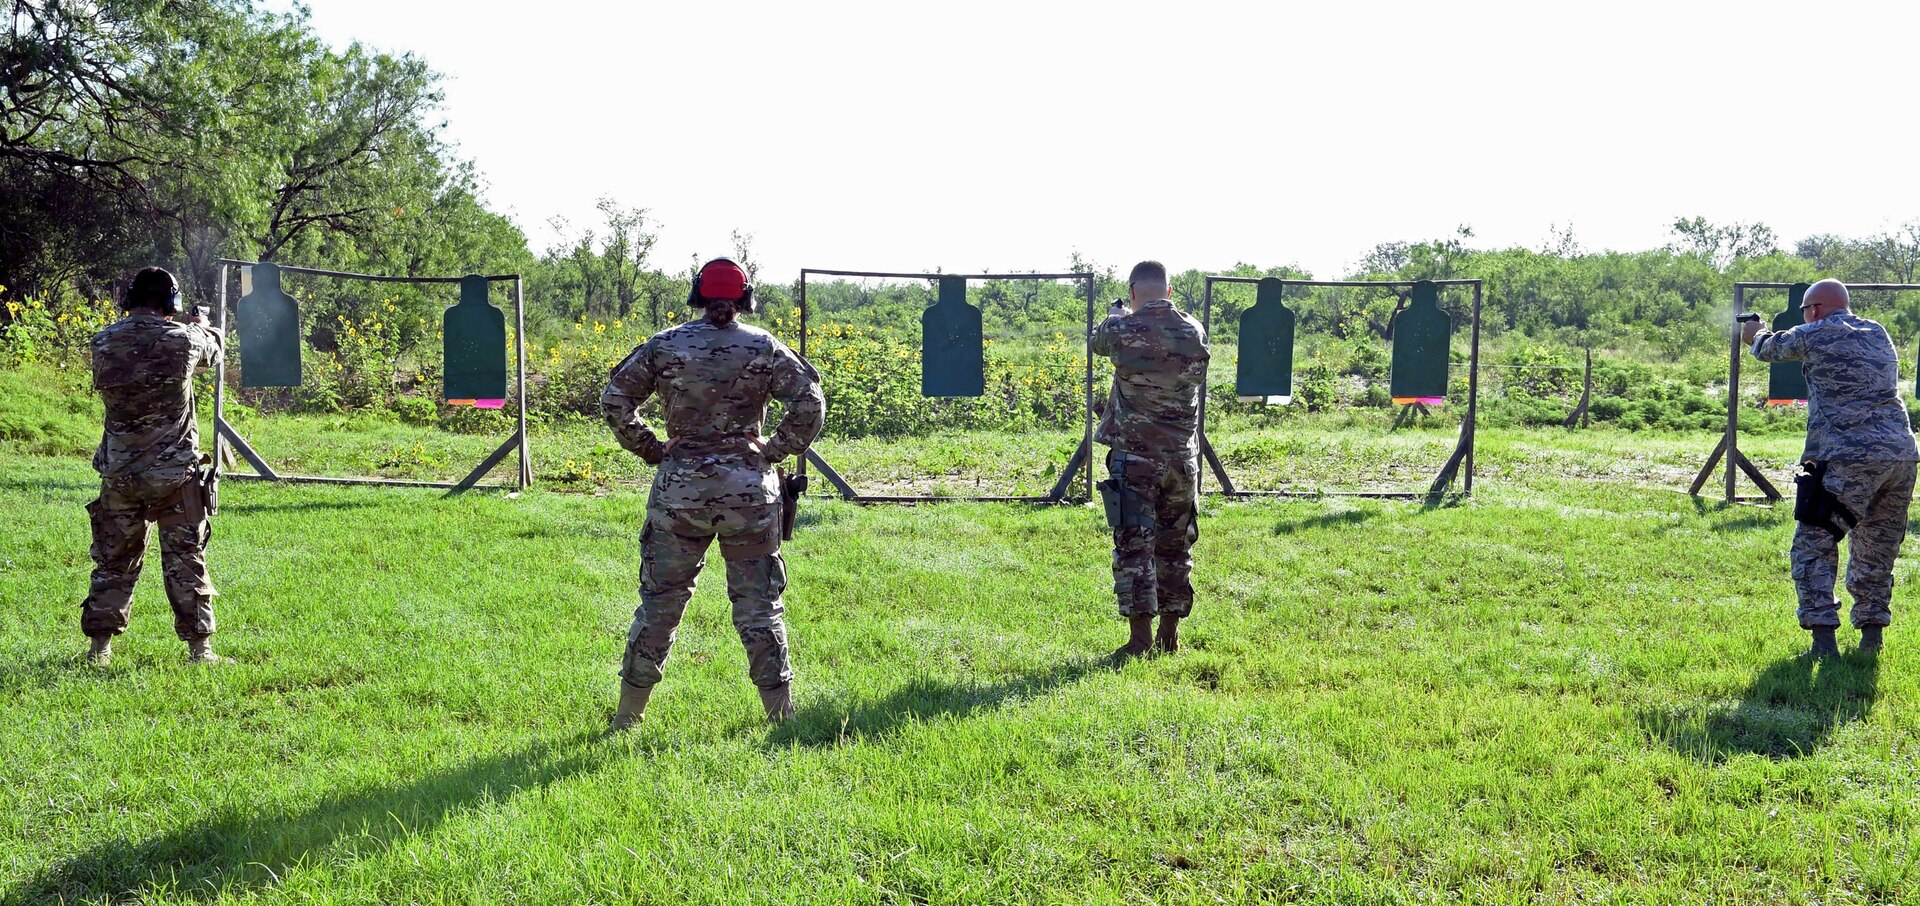 Air National Guard members from the 149th Security Forces Squadron conduct weapons qualification training at a firing range at Joint Base San Antonio-Lackland’s Chapman Training Annex May 27. Members from the 149th SFS received pistol, shotgun and grenade training during the all-day event.